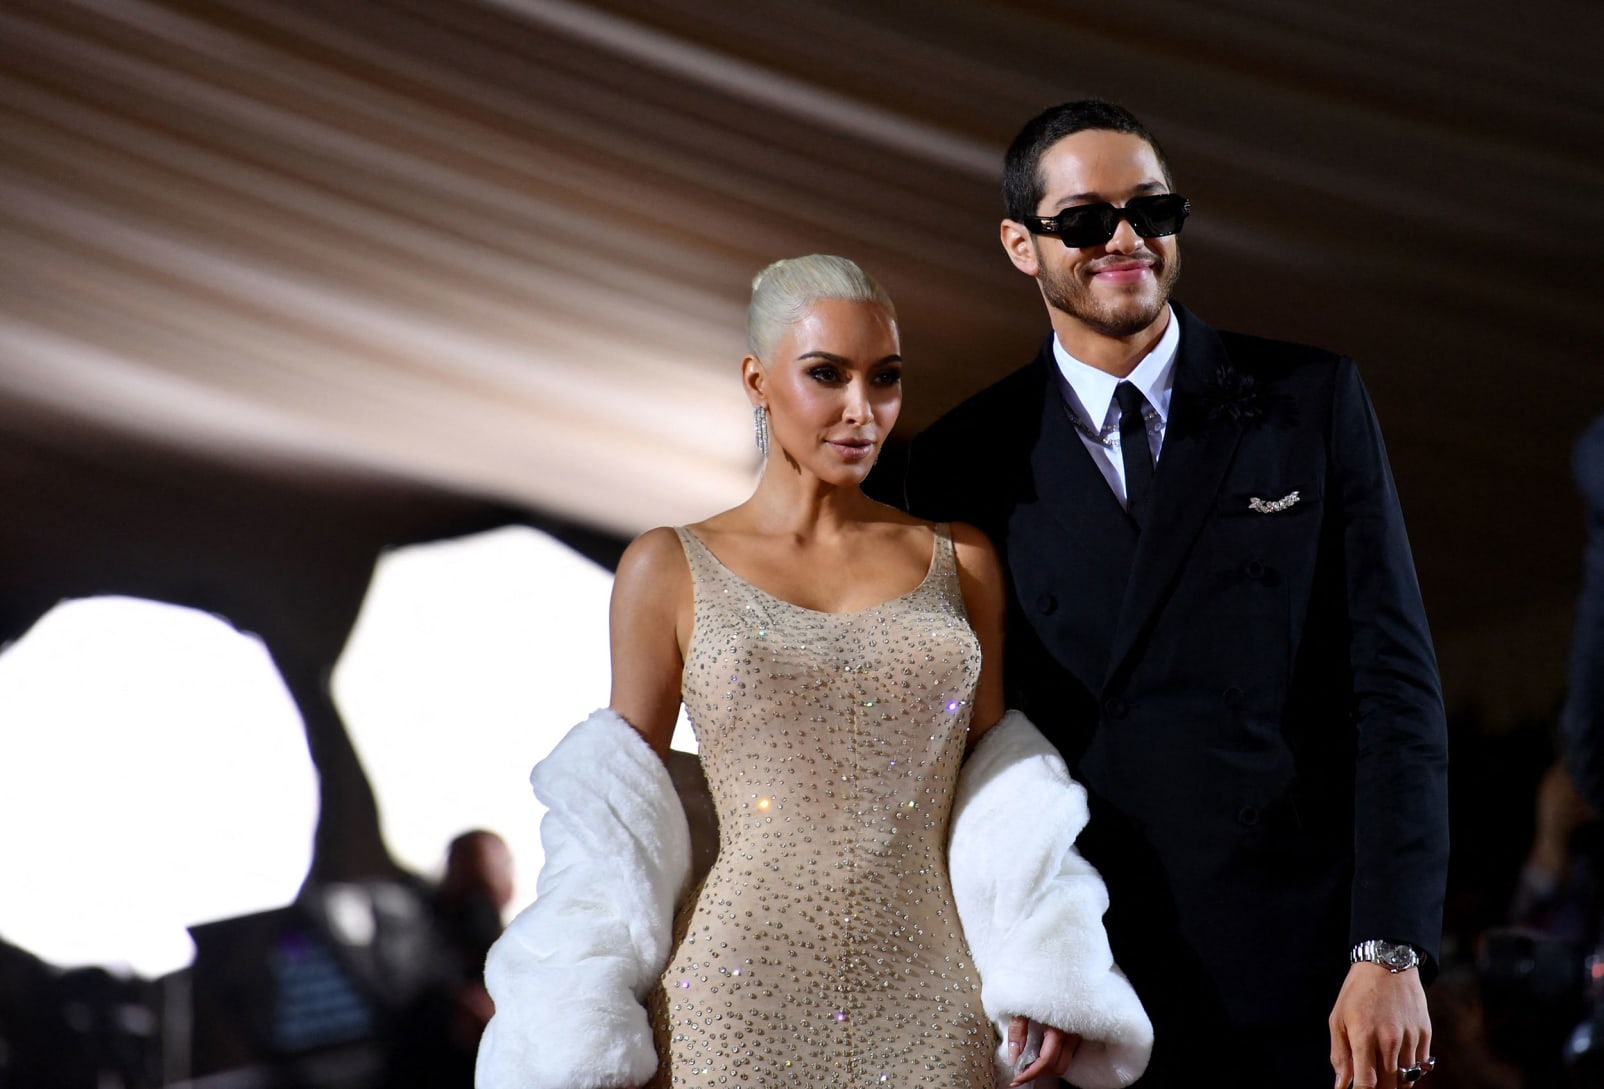 Kim Kardashian wore Marilyn Monroe's iconic dress -- the one she famously sang "Happy Birthday, Mr. President" in at John F. Kennedy's birthday fundraiser in 1962. Pete Davidson kept things simple in a suit and sunglasses. 